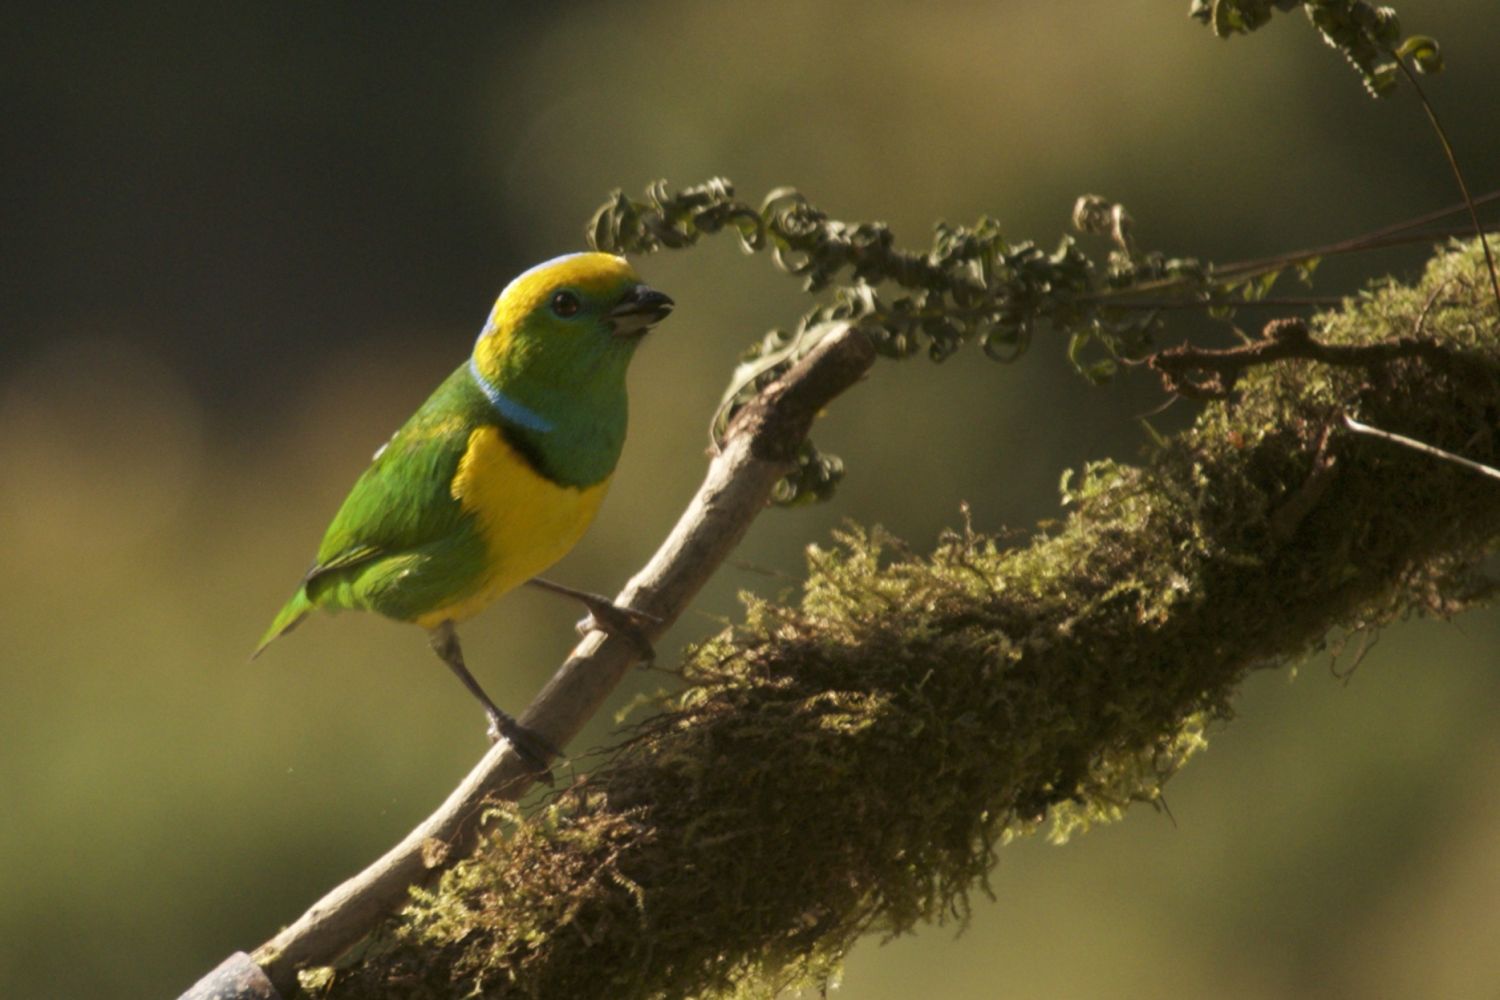 A photo of a bird captured by a student on a photography study tour to Costa Rica.